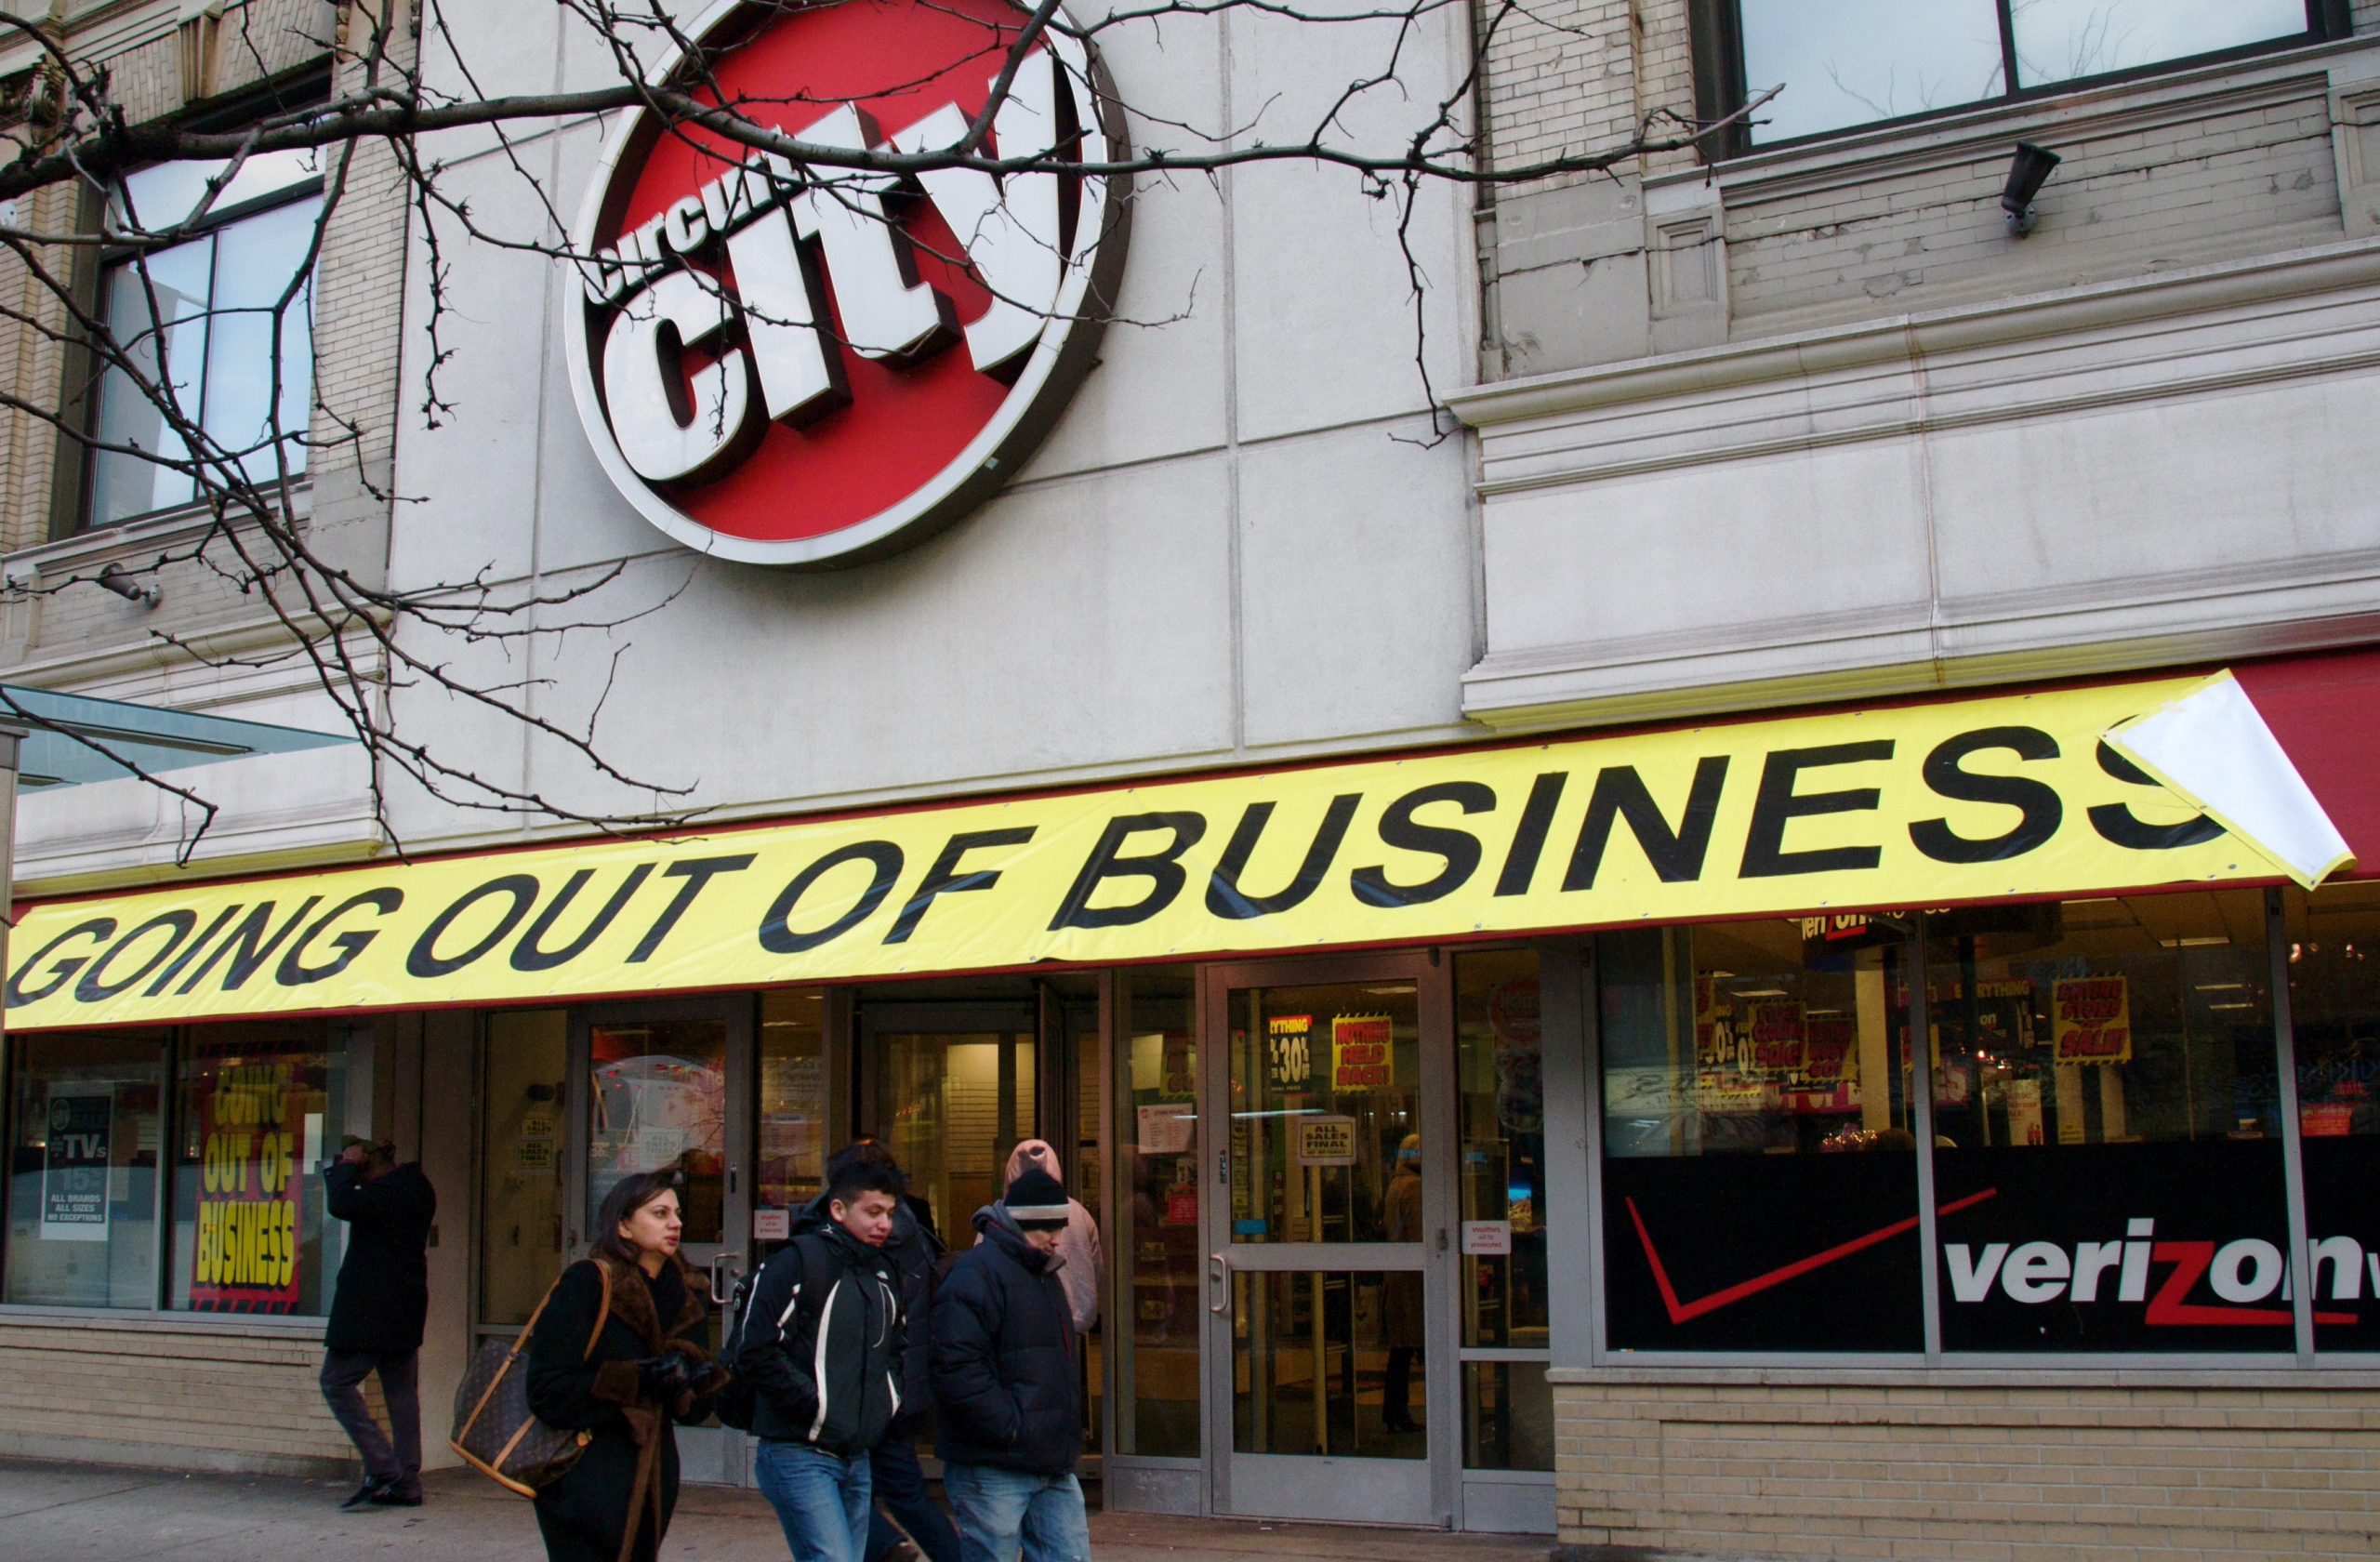 Circuit City store with "Going out of business" sign